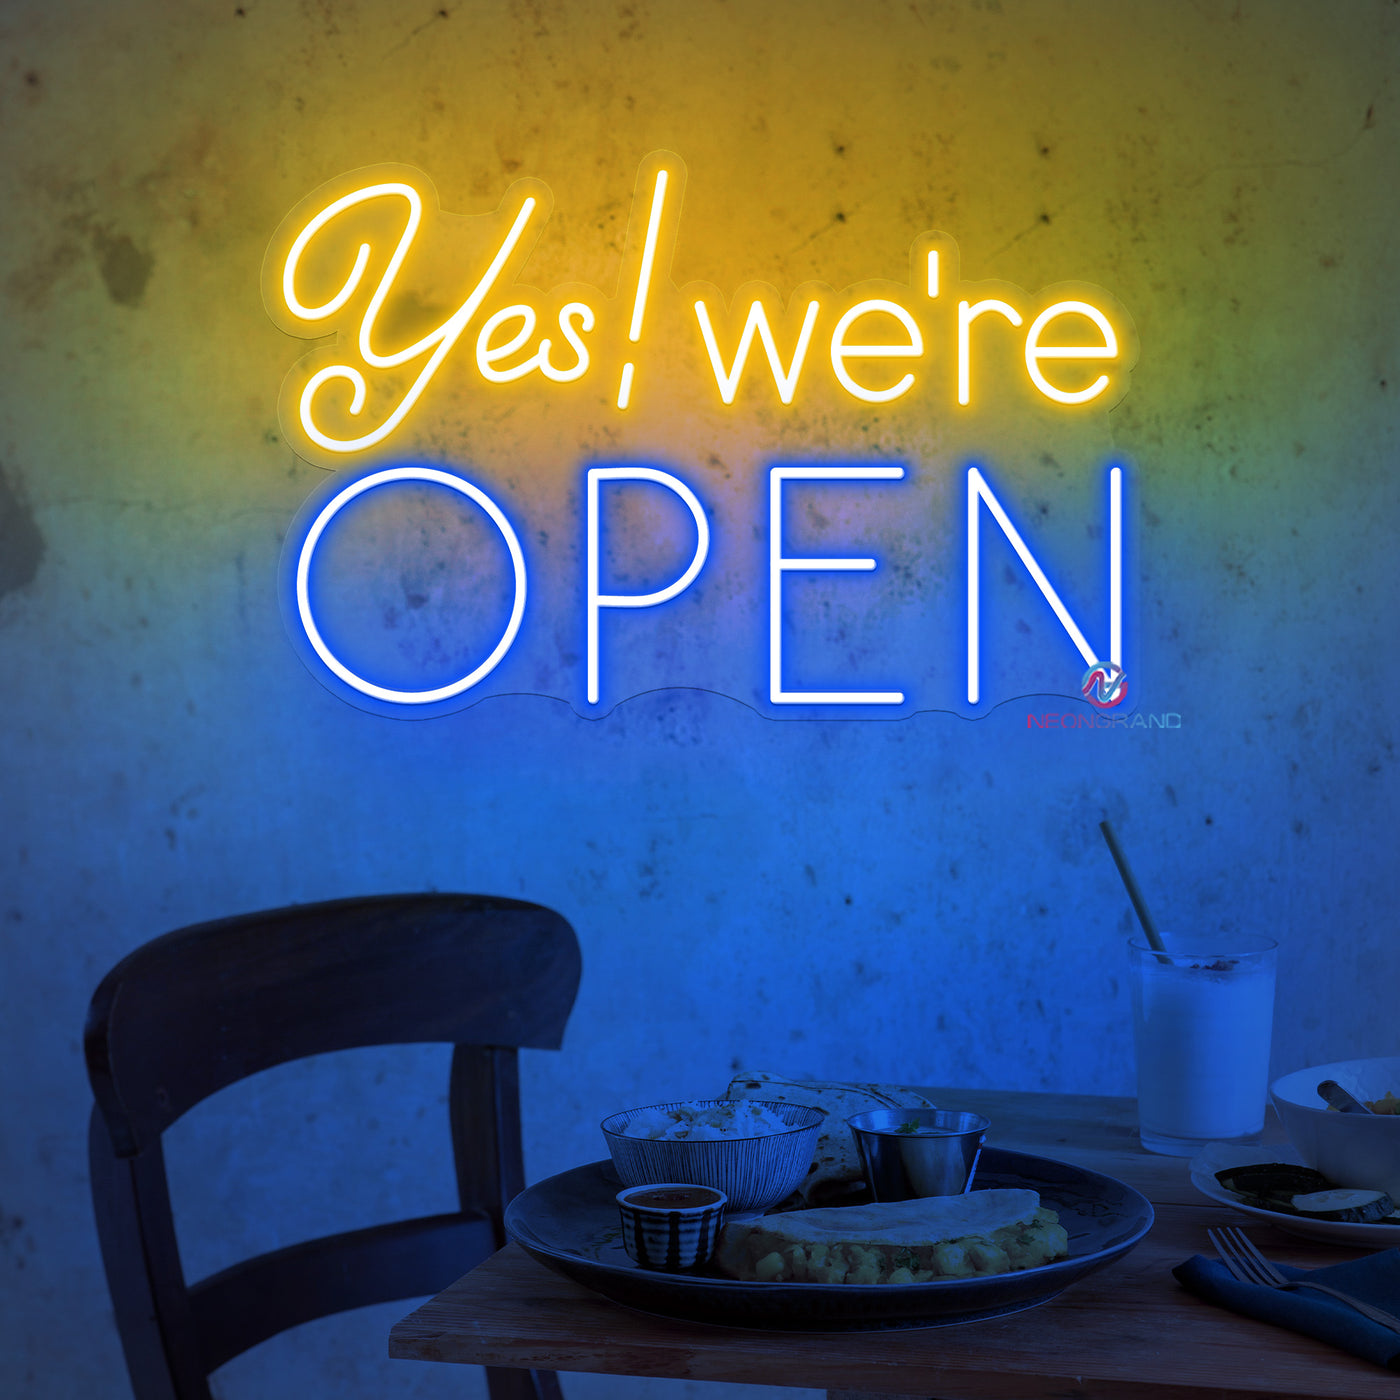 Yes We're Open Neon Sign Business Led Light